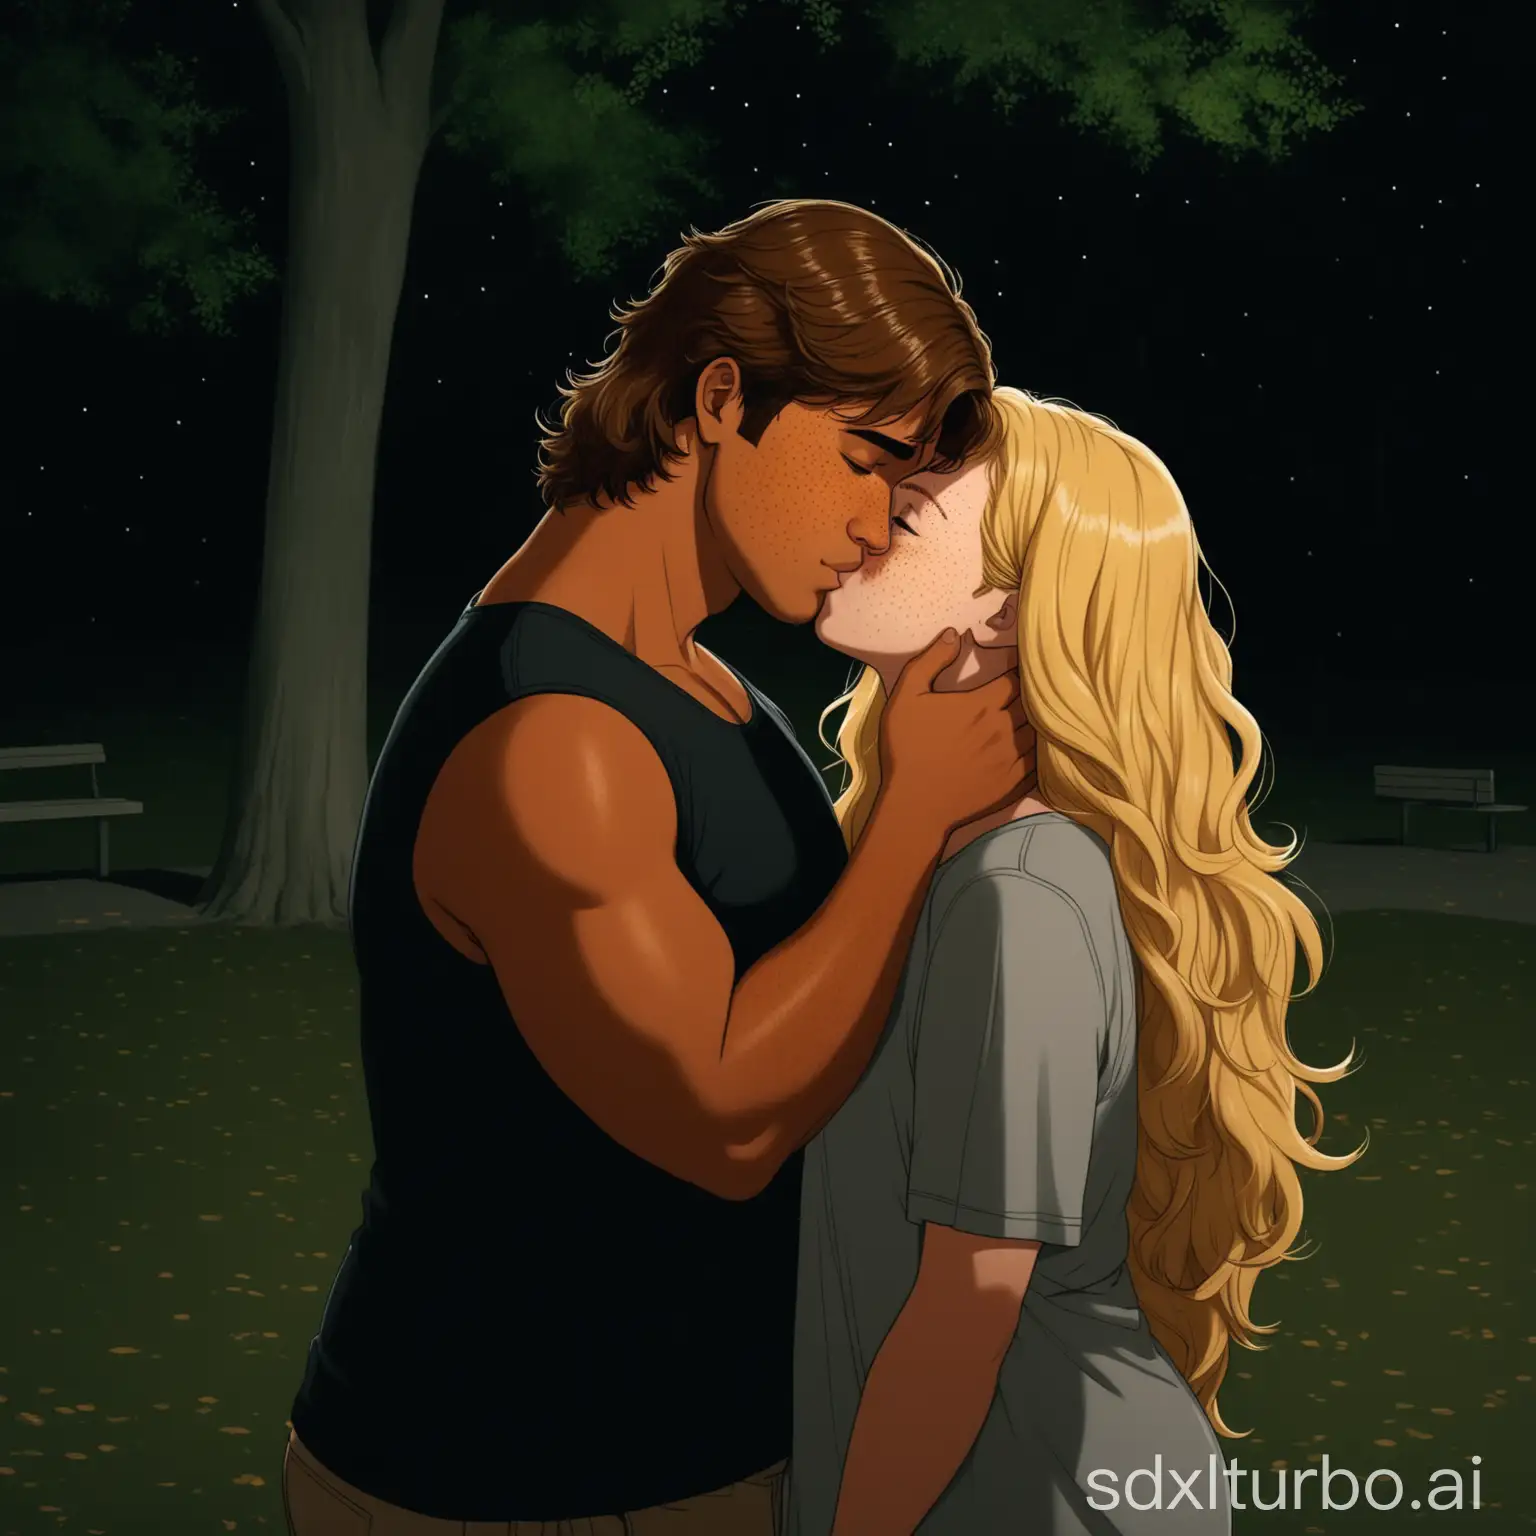 a handsome tanned chubby and young man, brown mullet hair kissing a blonde girl with frizzy long hair and bangs, freckles, in a dark park, full view